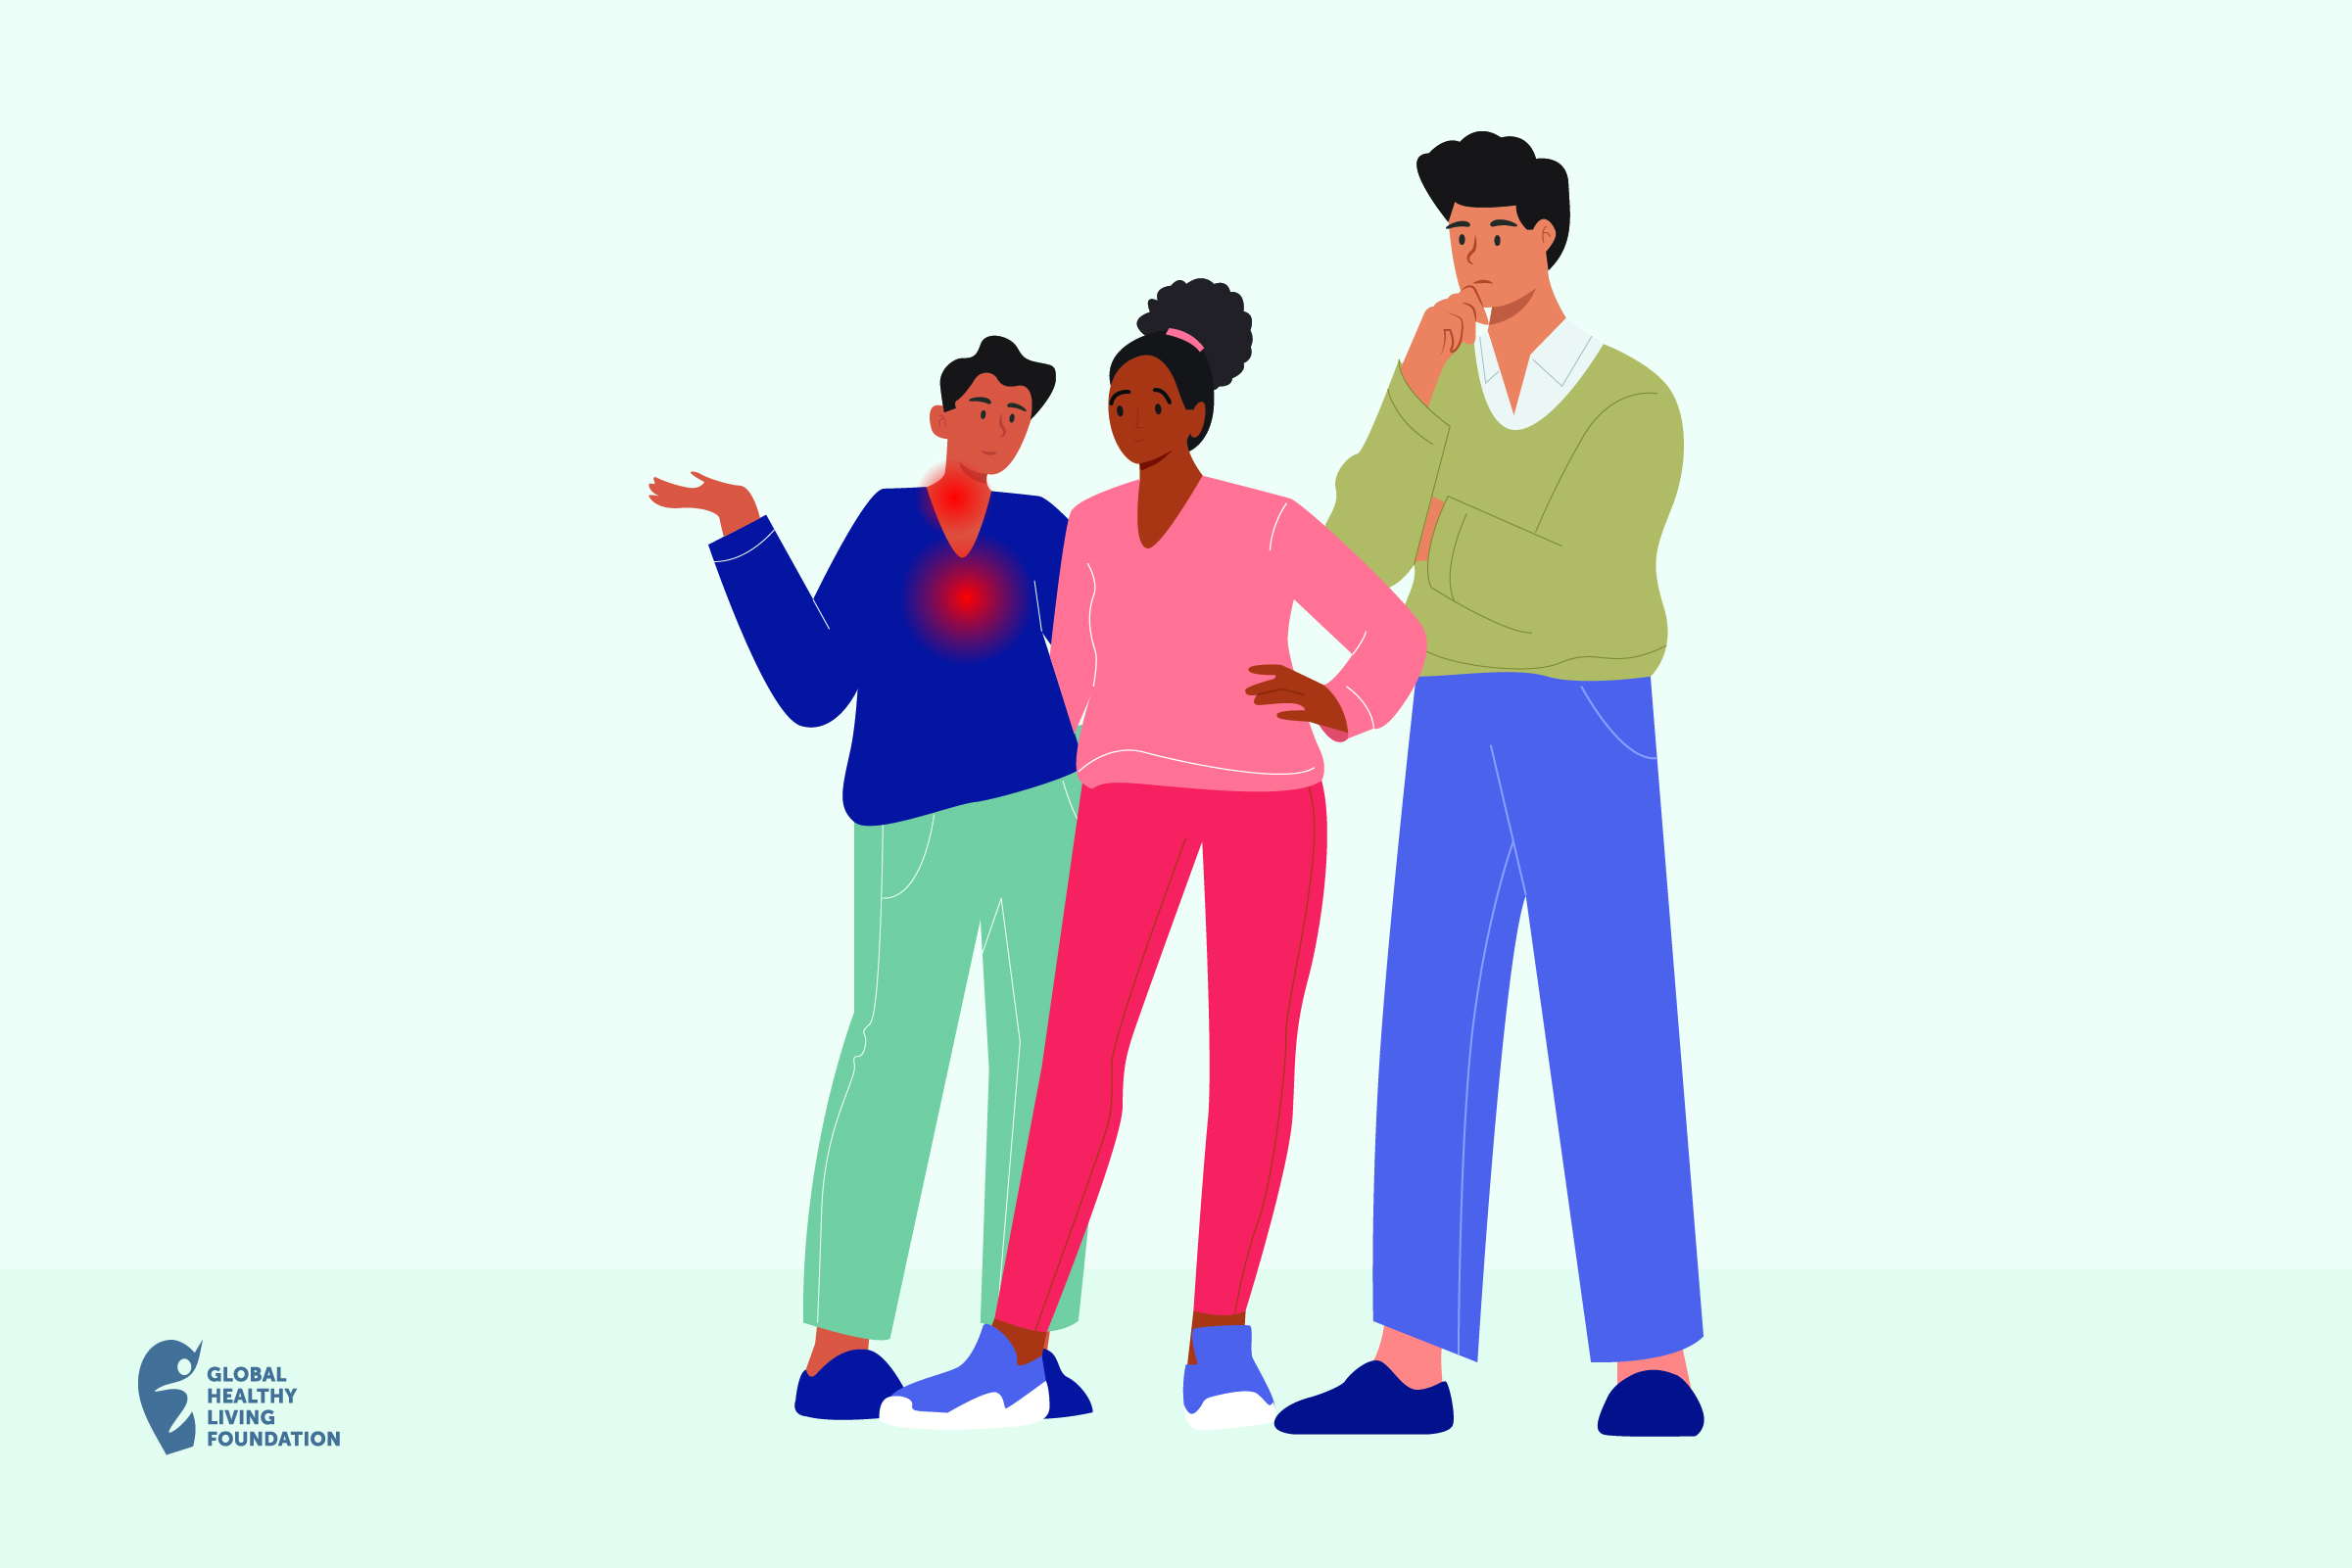 Illustration of group of people in different colors